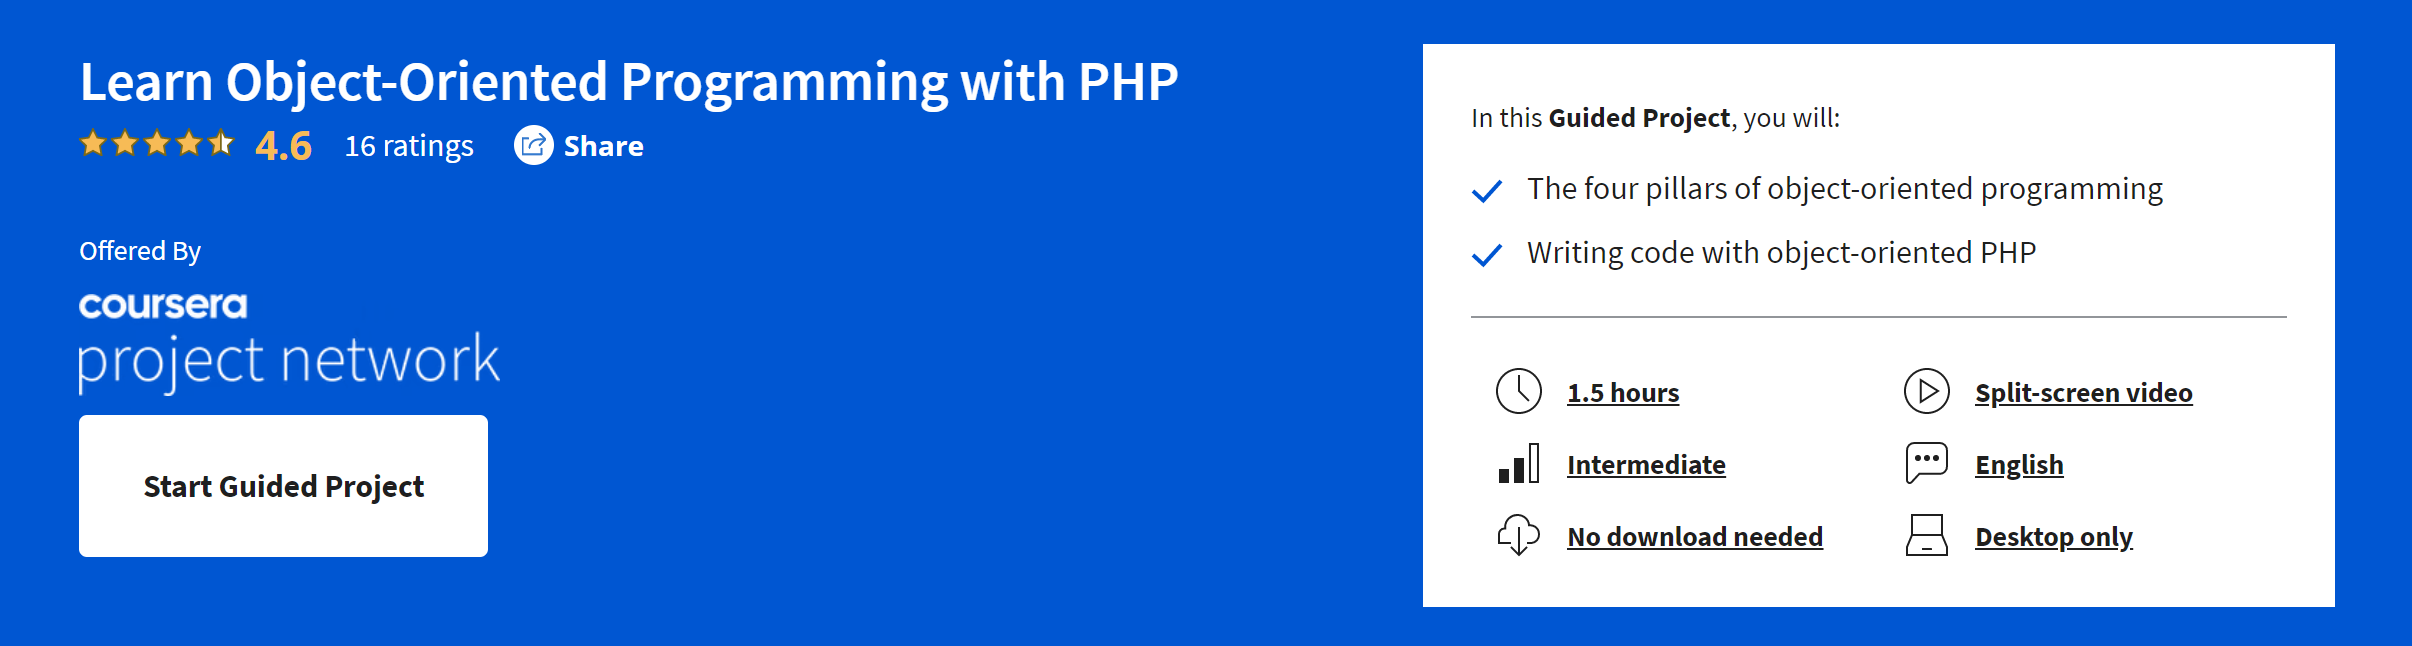 Learn Object Oriented Programming with PHP